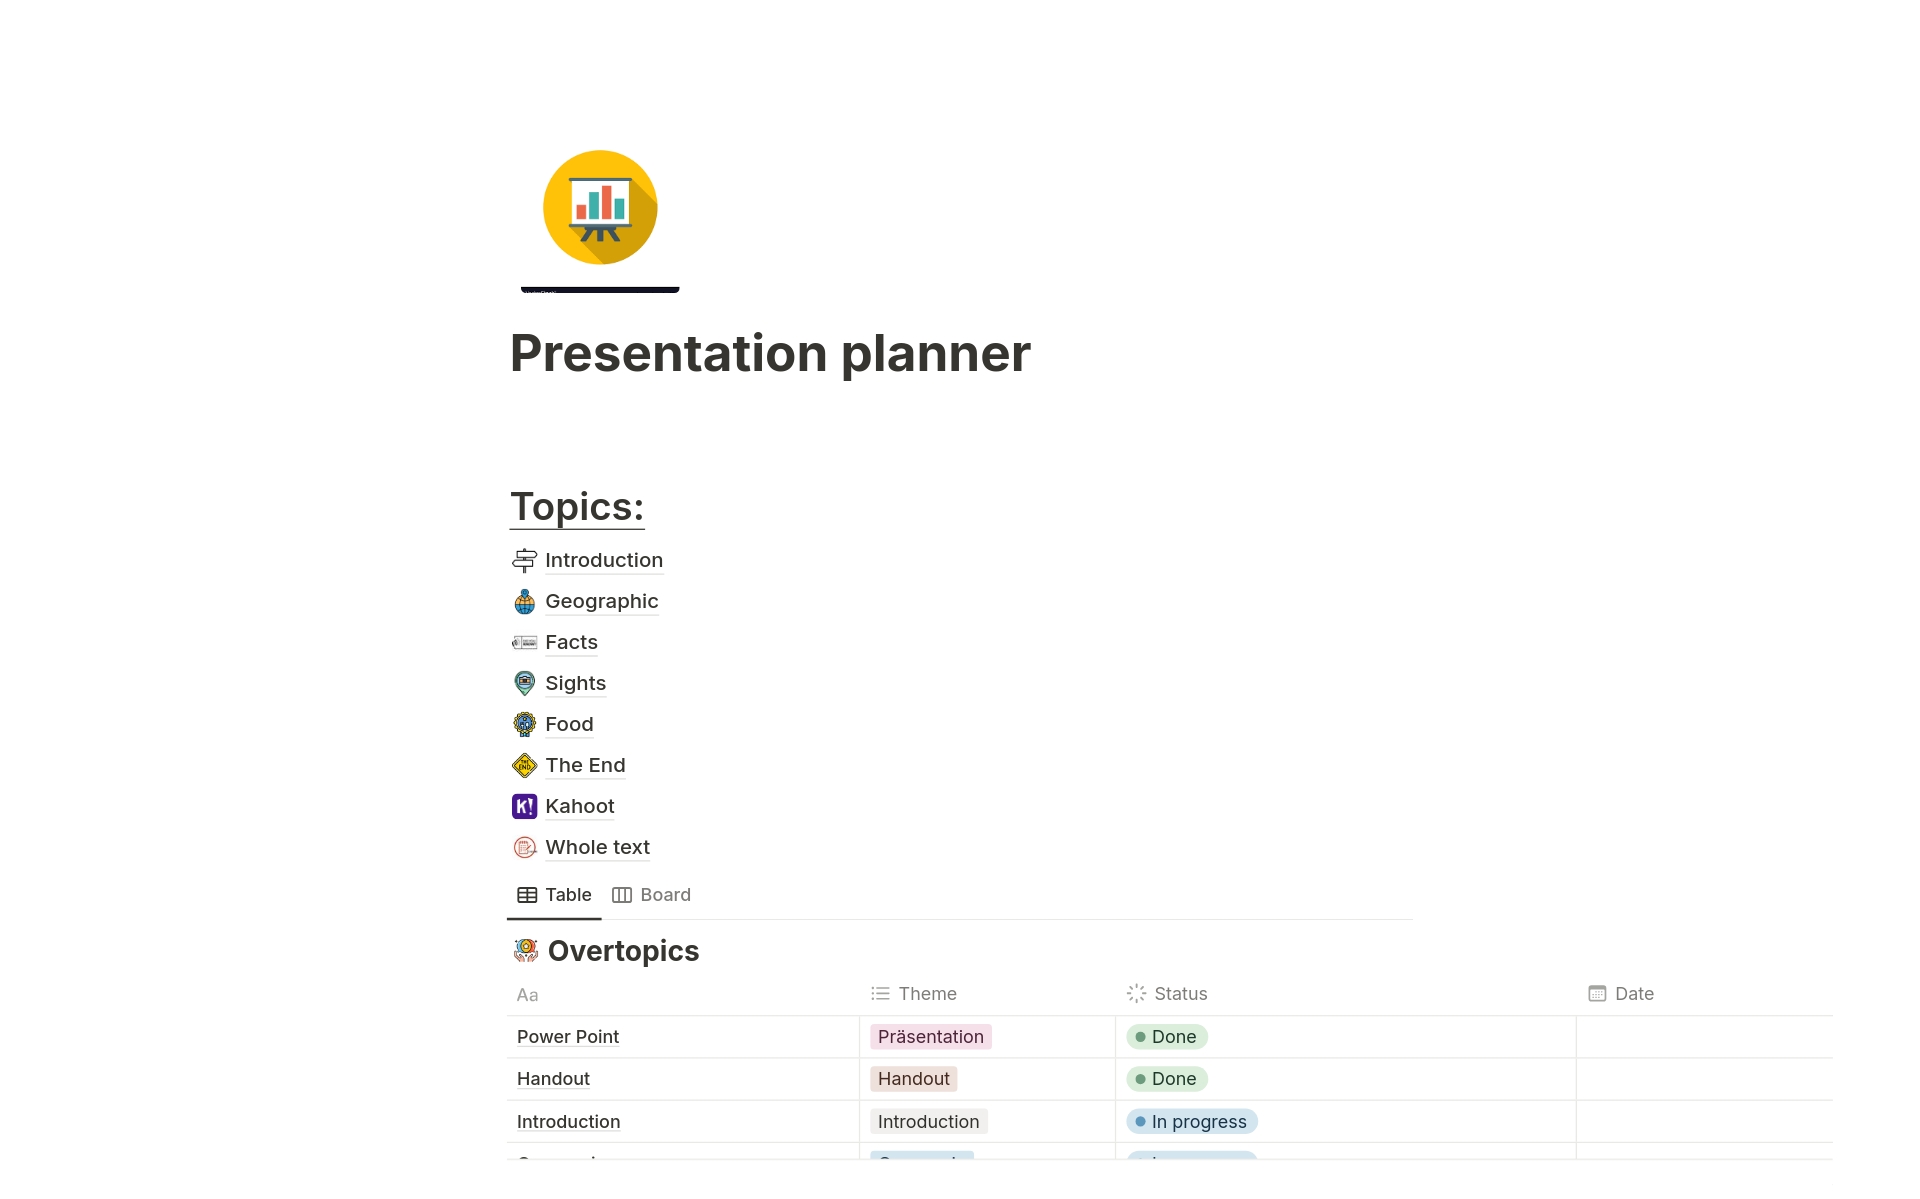 This Notion template is designed to help you organize presentations efficiently. Whether you're a student, a business professional, or a freelancer, this template provides a structured and intuitive way to plan, create, and manage your presentations.





